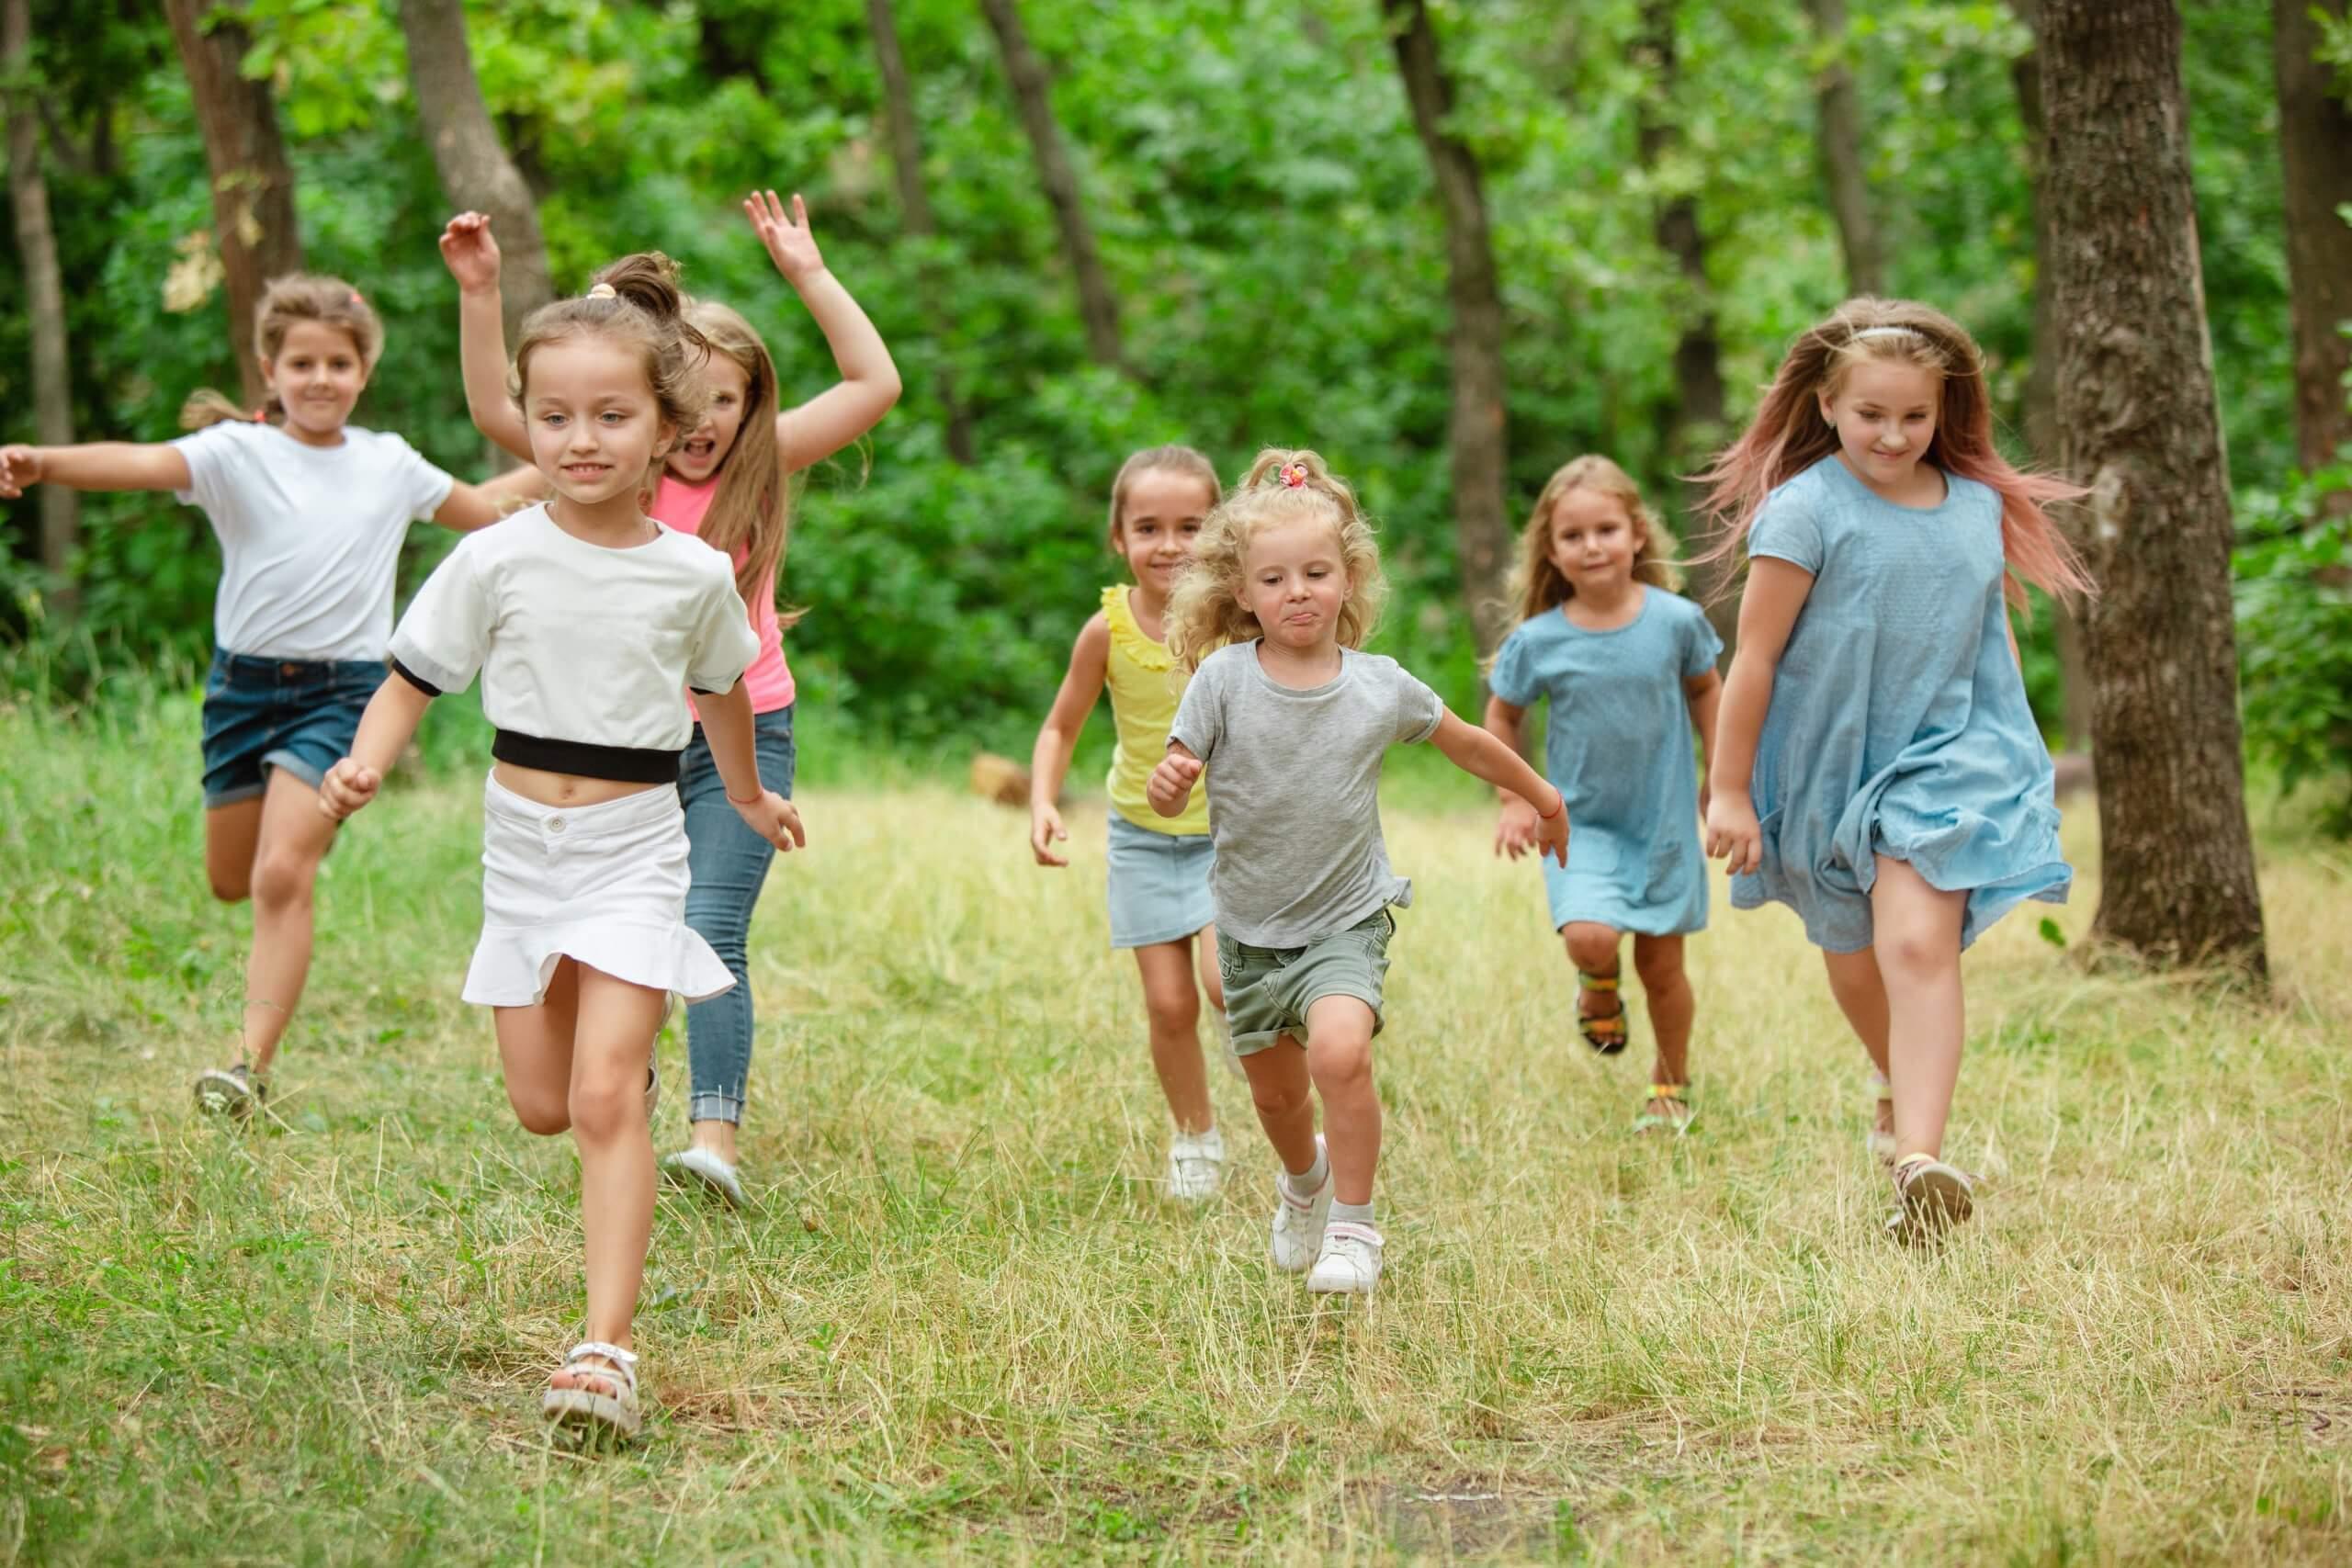 The Best Spring Camps to Help Kids and Parents with “Spring Fever”